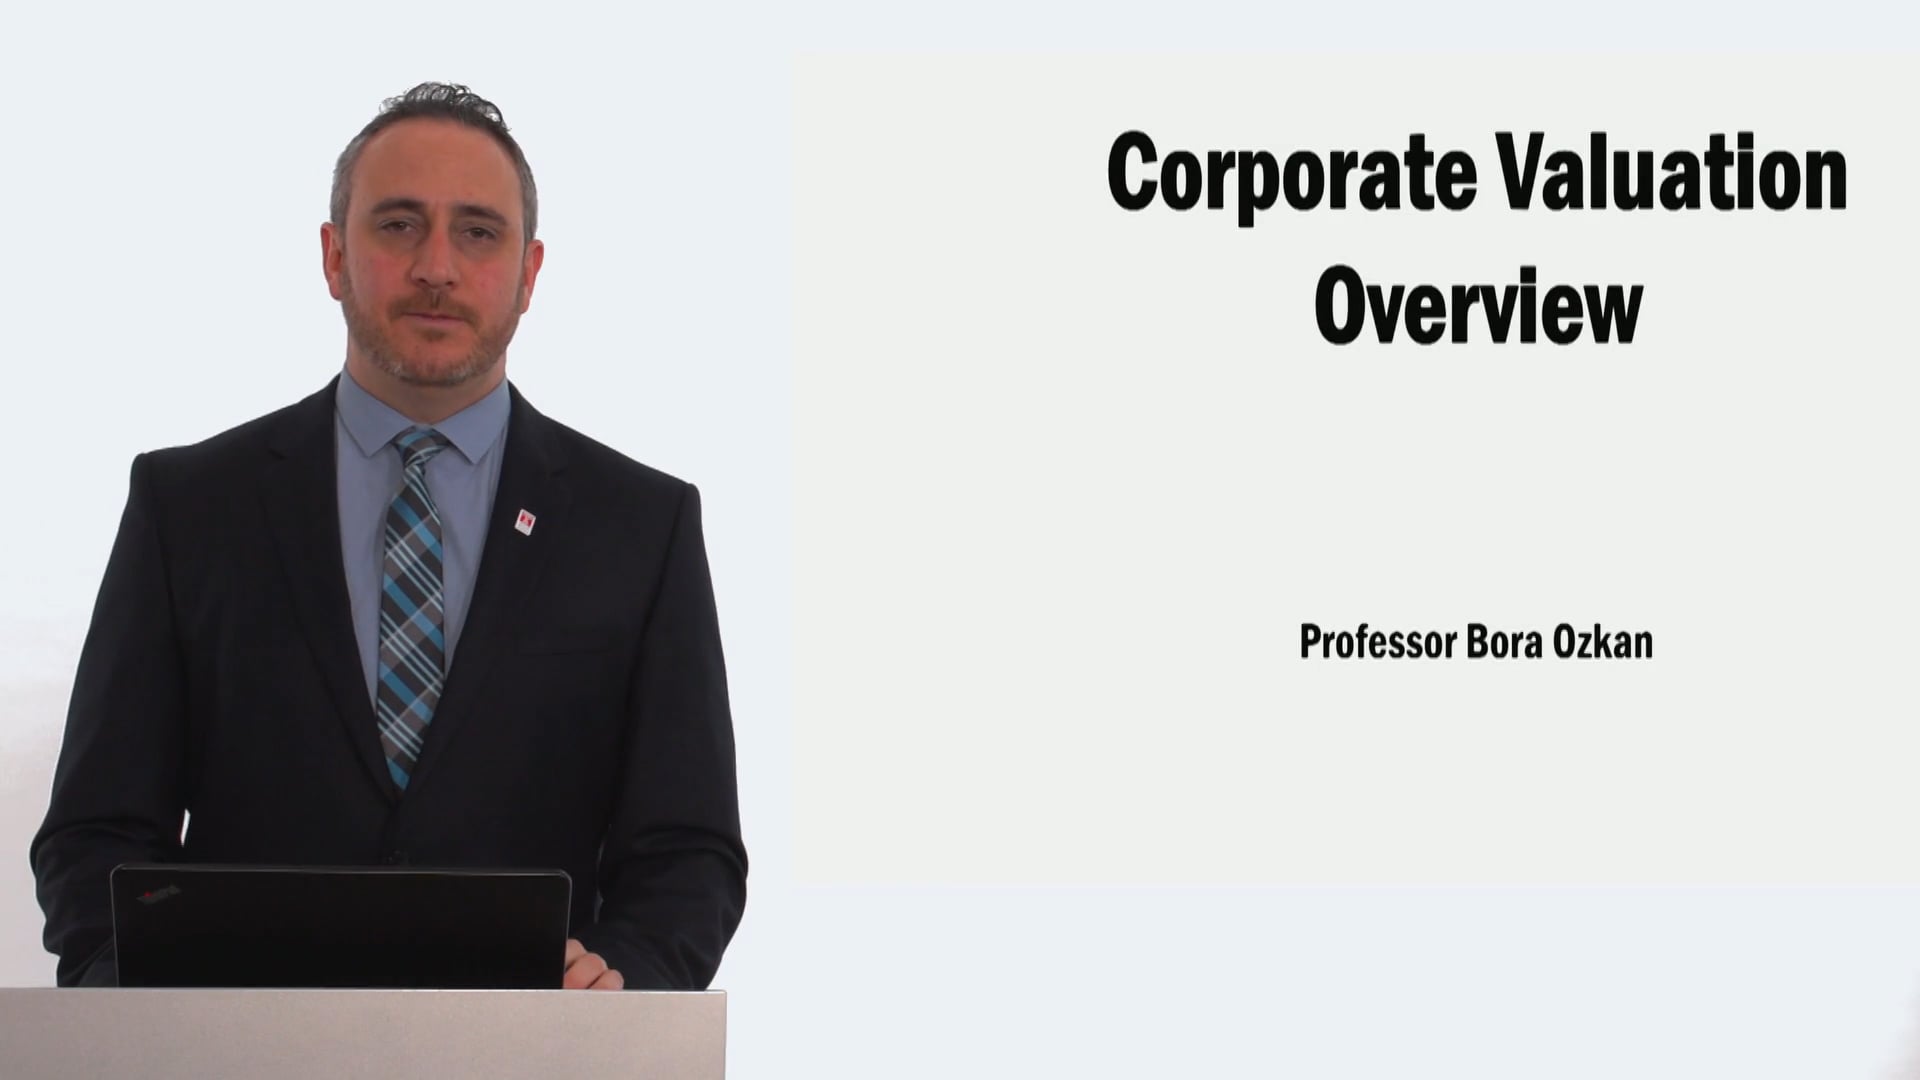 Corporate Valuation Overview